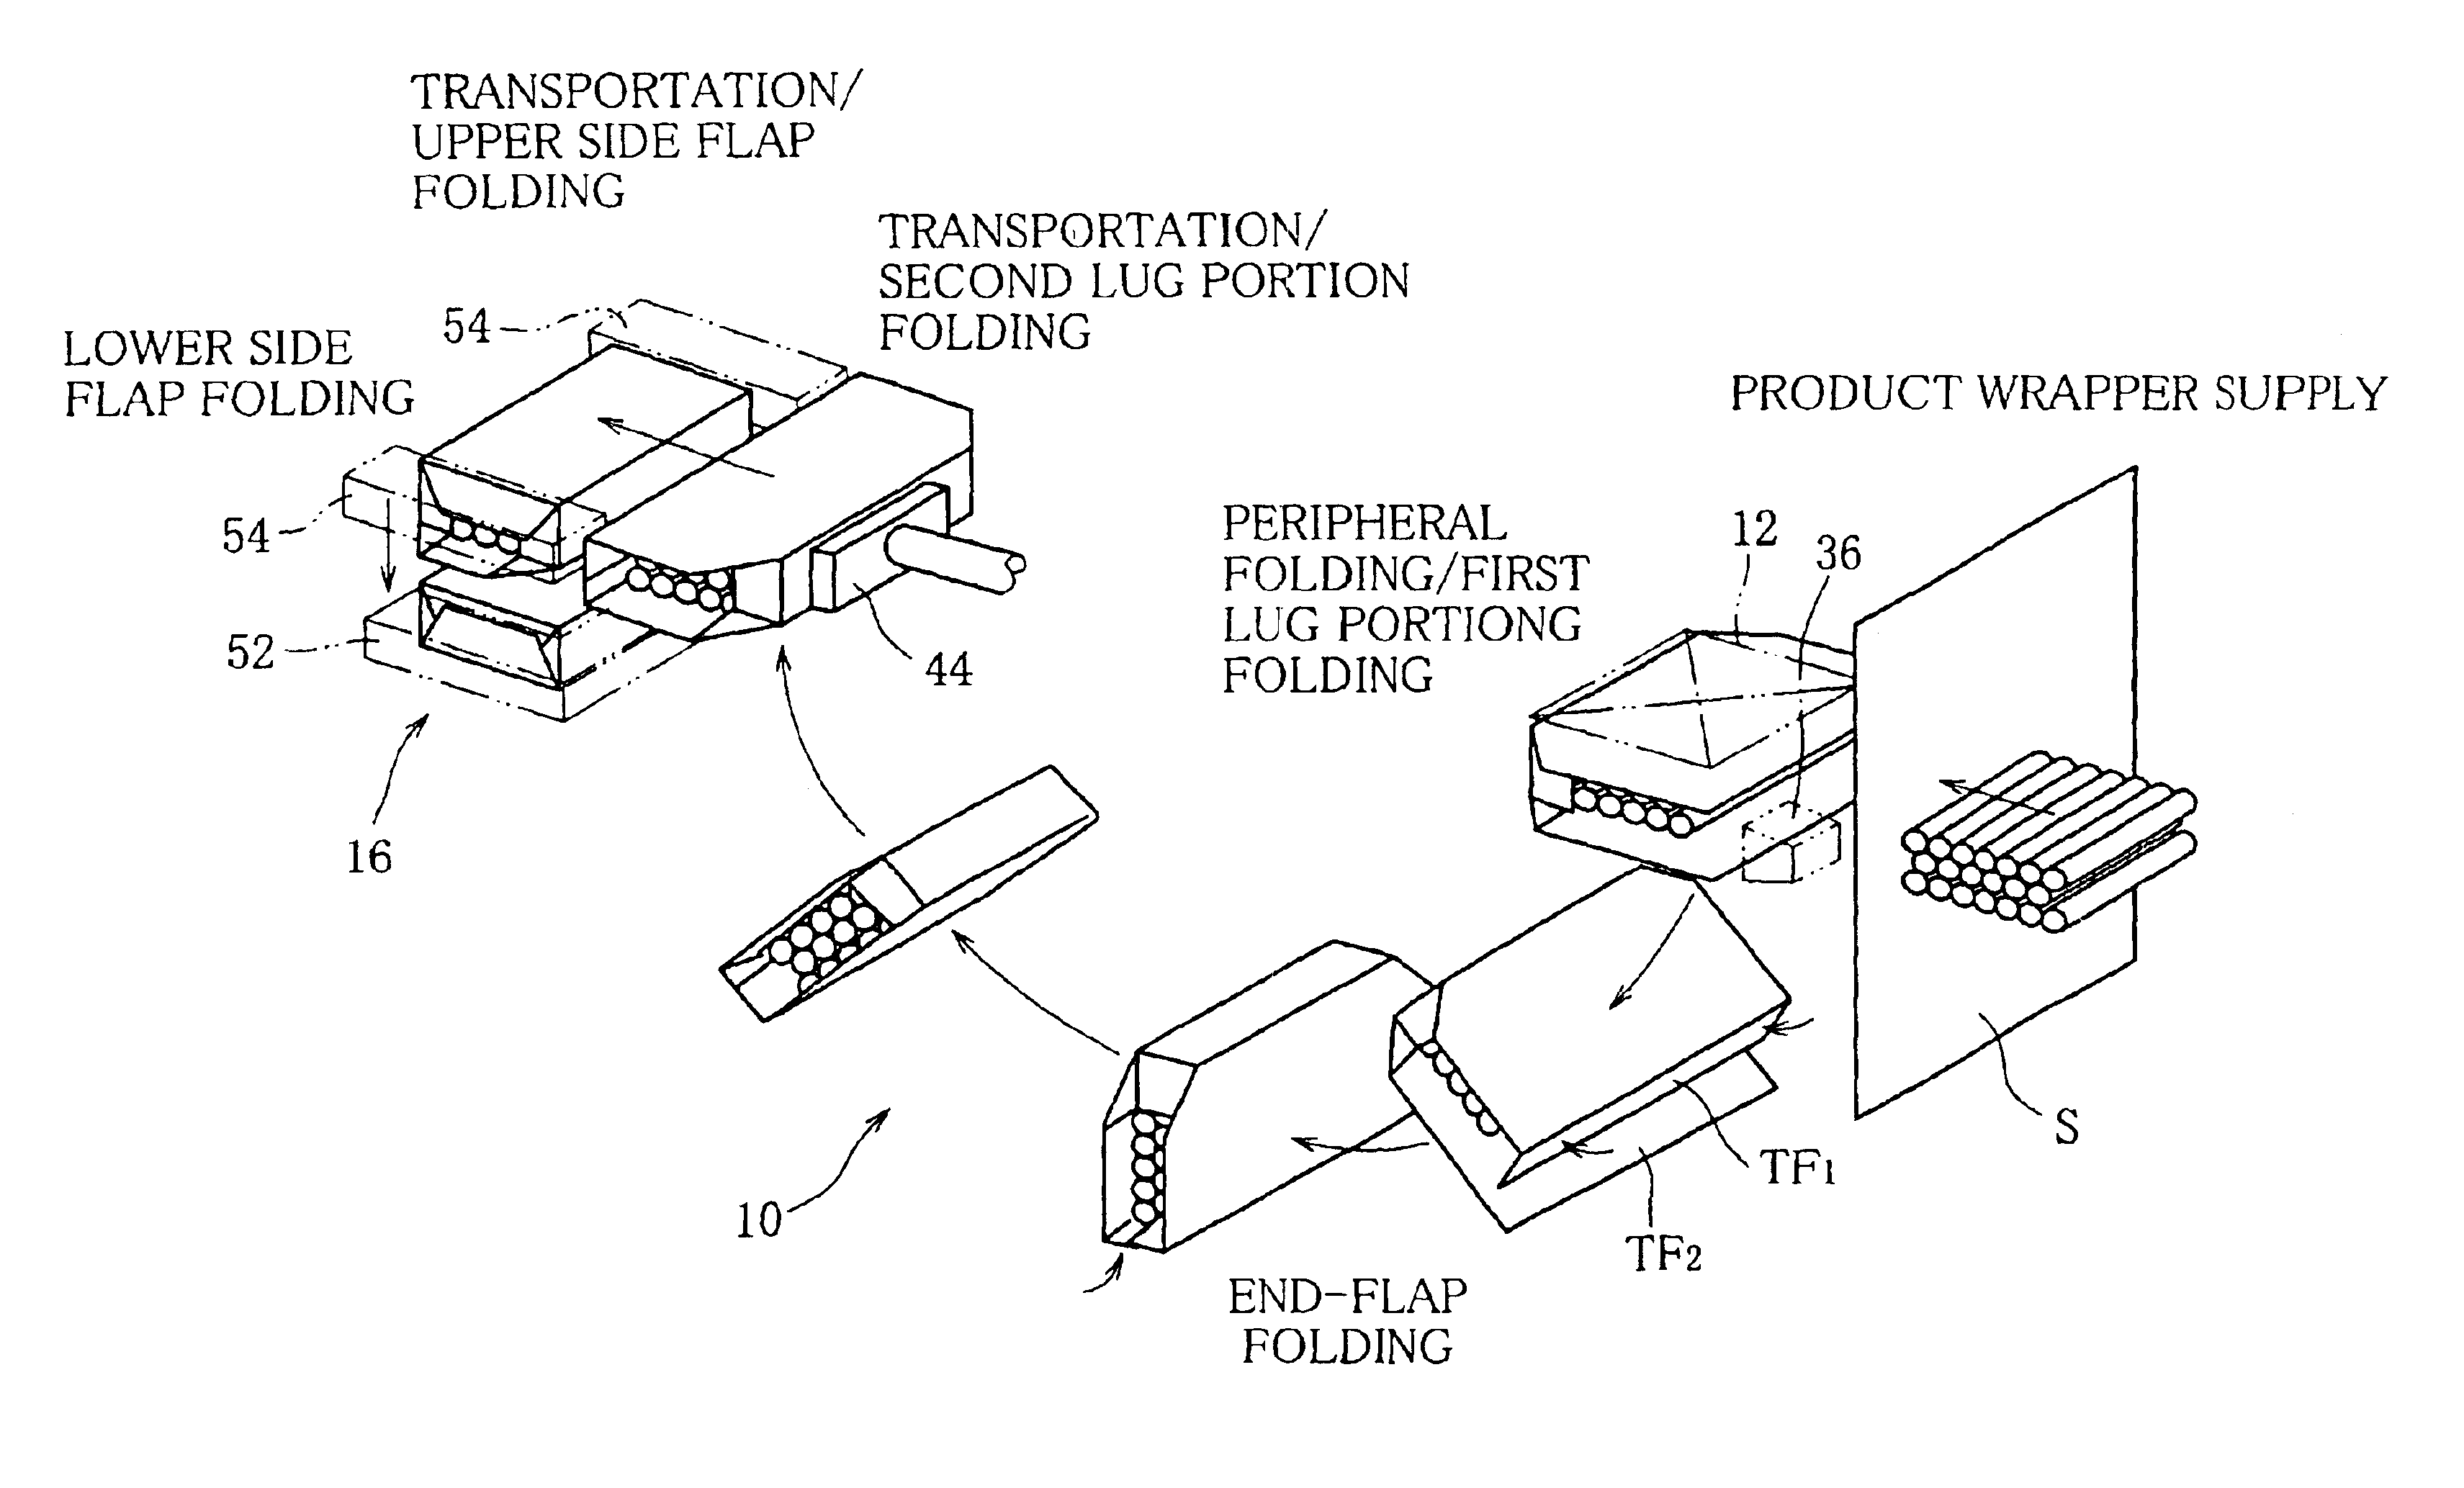 Packaging material folding device of packaging machine